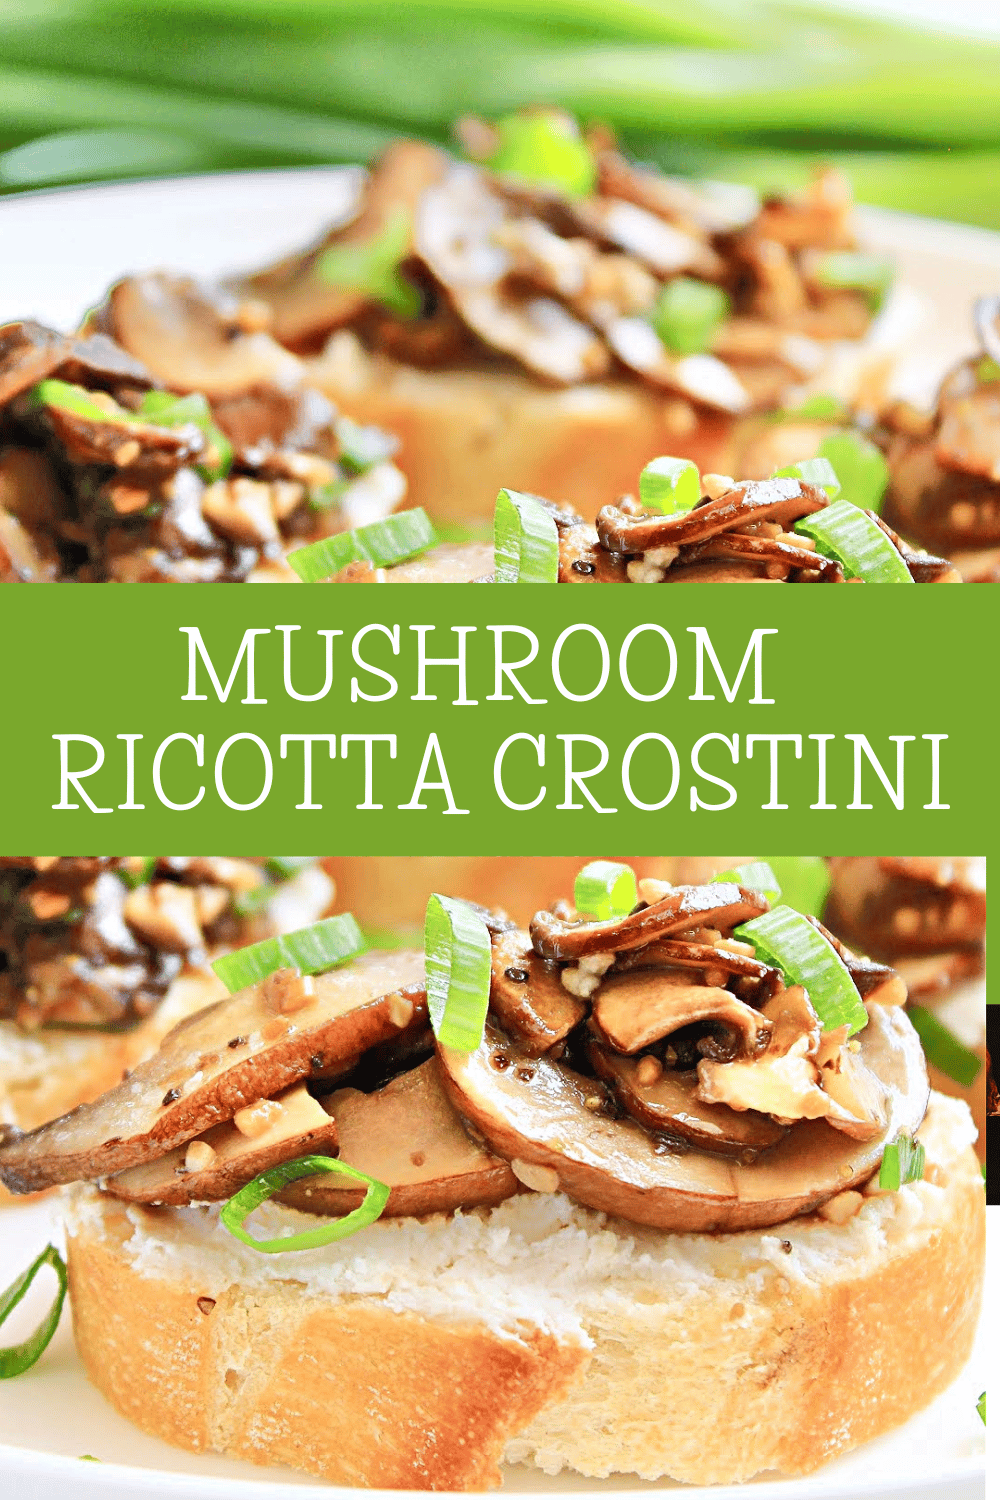 Mushroom Ricotta Crostini ~ Sauteed balsamic mushrooms and creamy ricotta on toasted baguette slices. An easy and elegant appetizer, perfect for the holidays! via @thiswifecooks